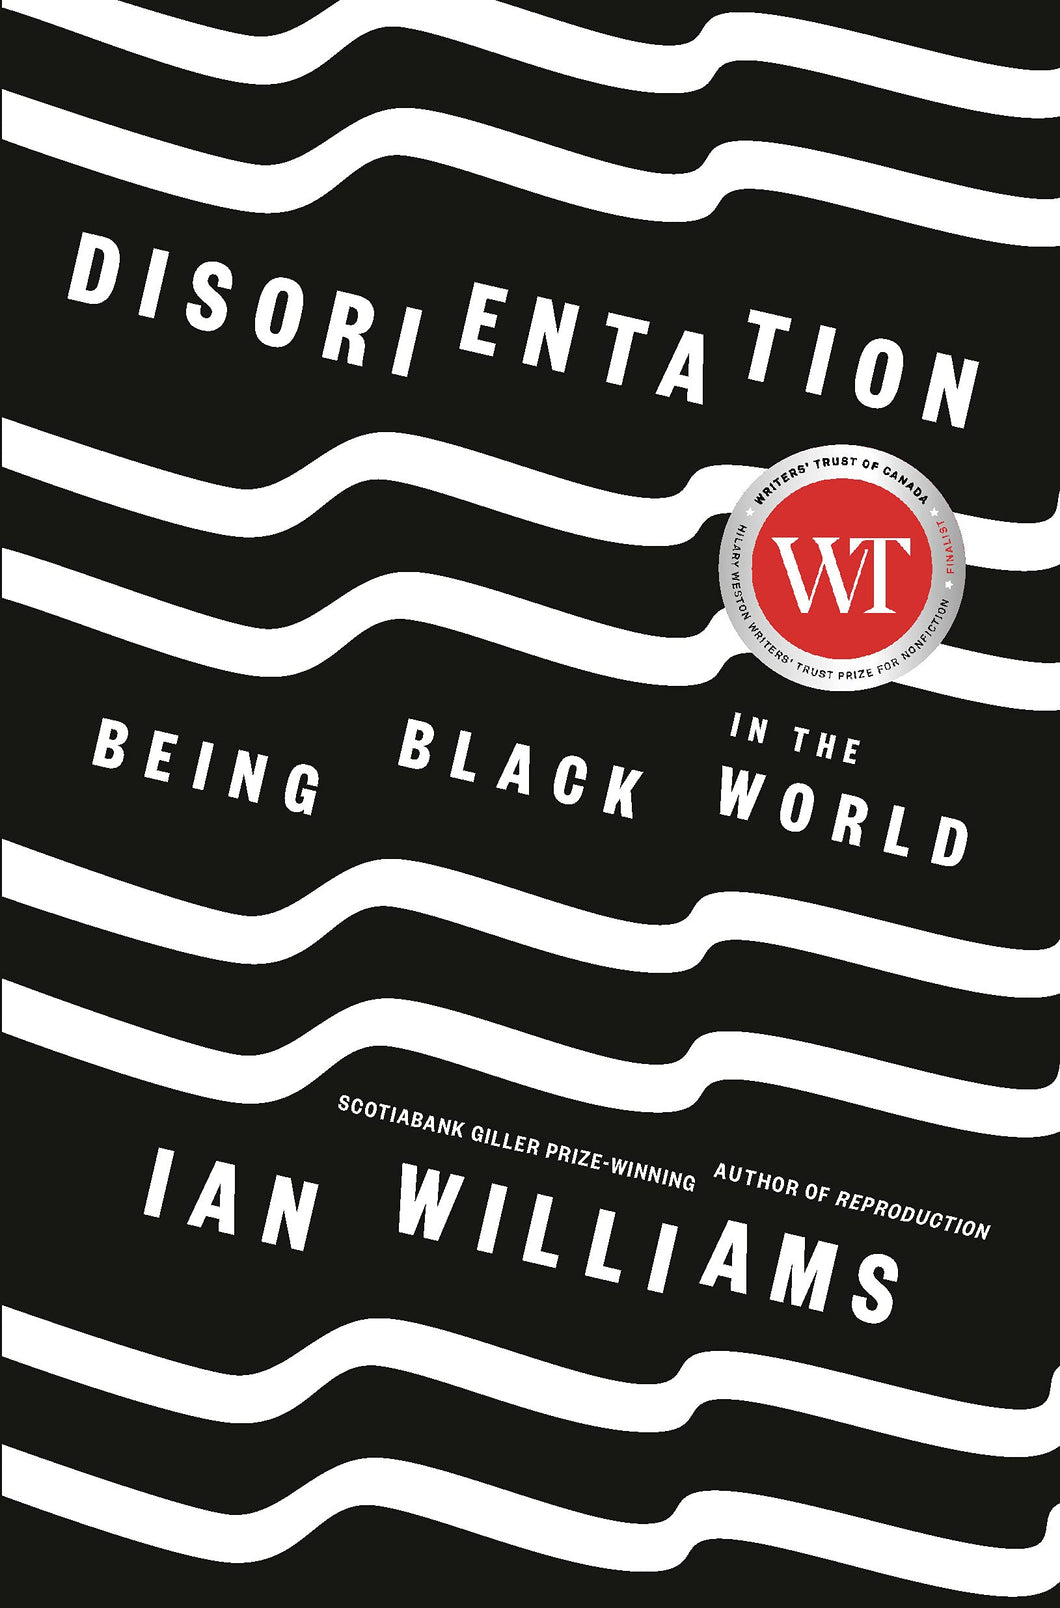 Disorientation: Being Black in the World [Ian Williams]